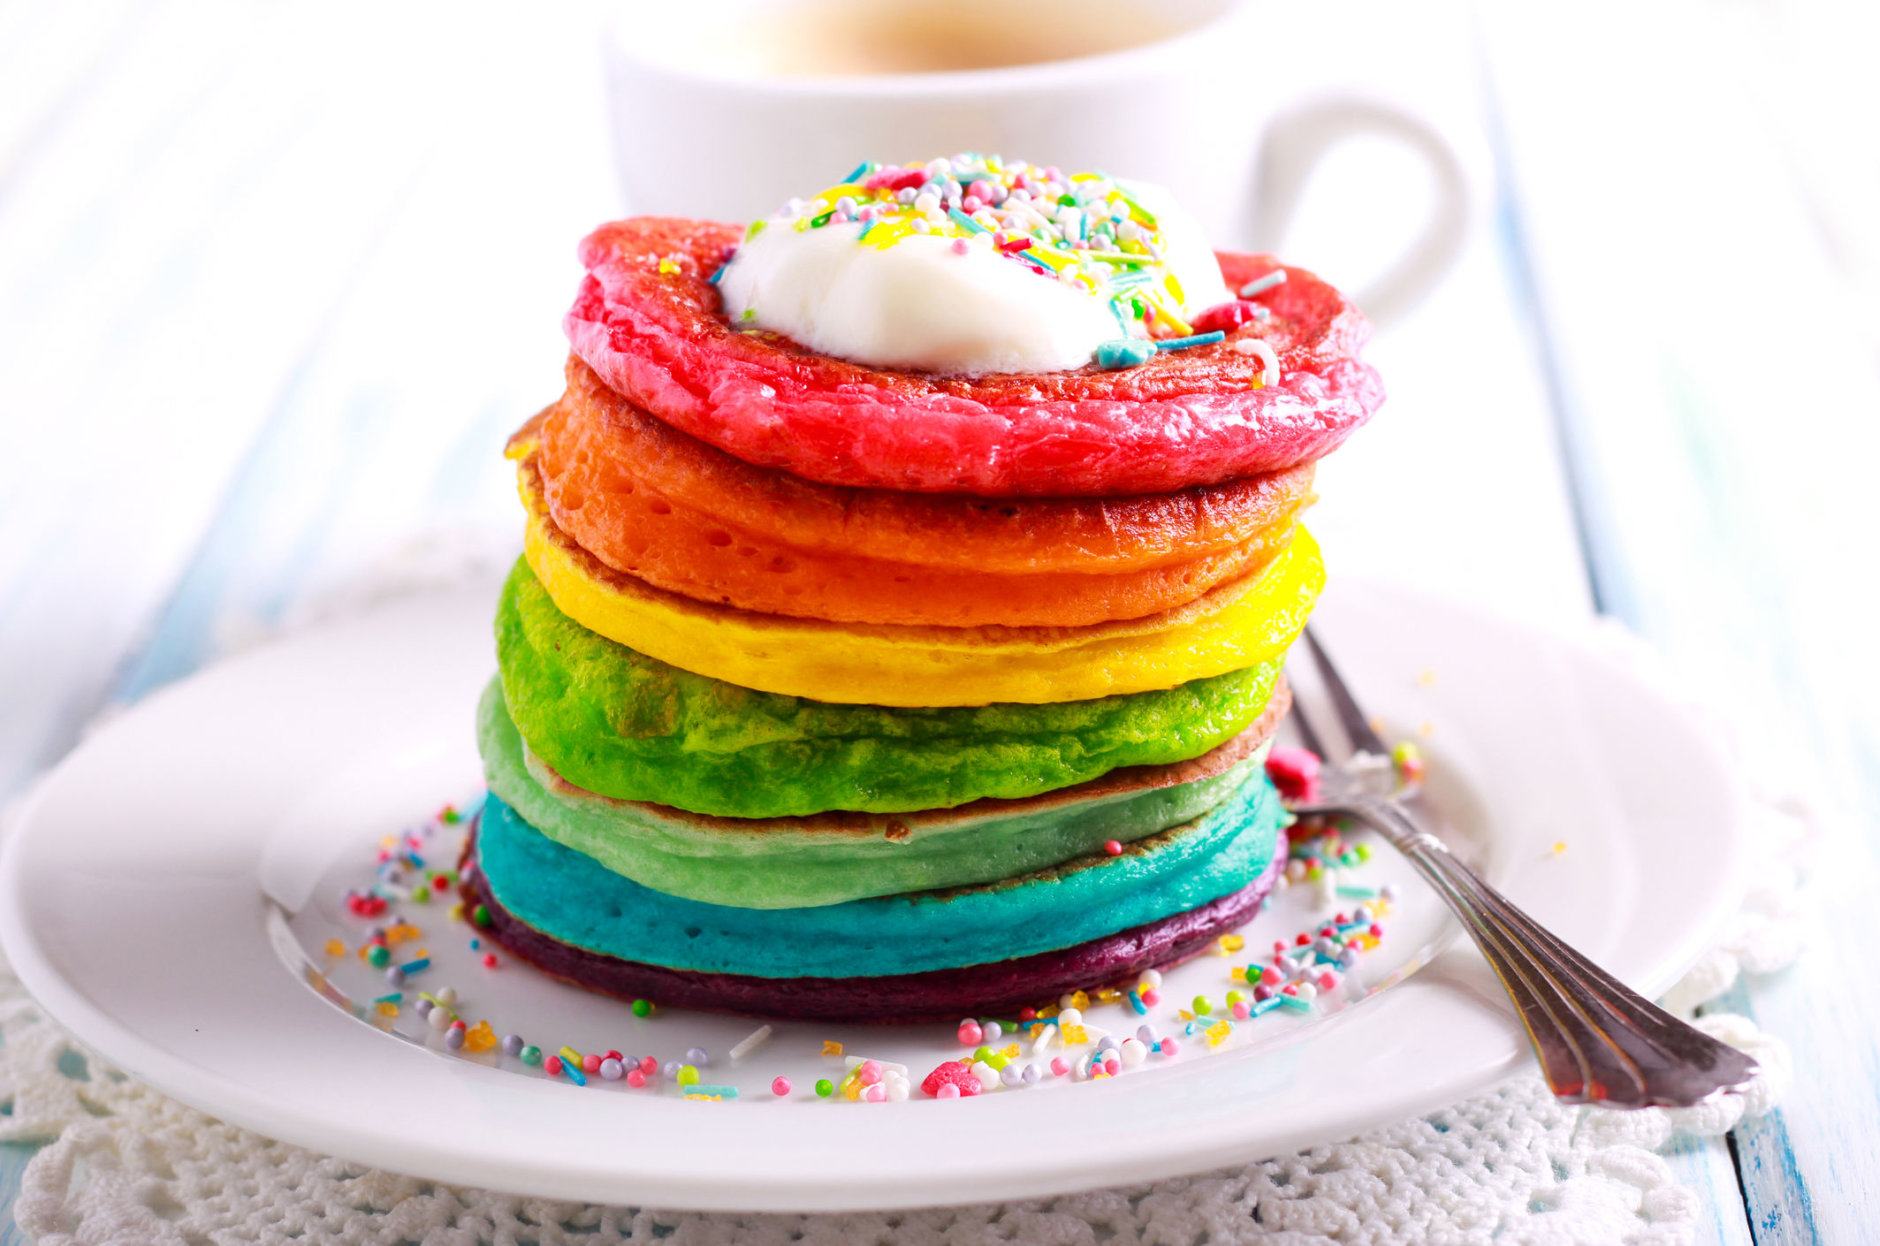 Rainbow pancakes, served in pile on plate